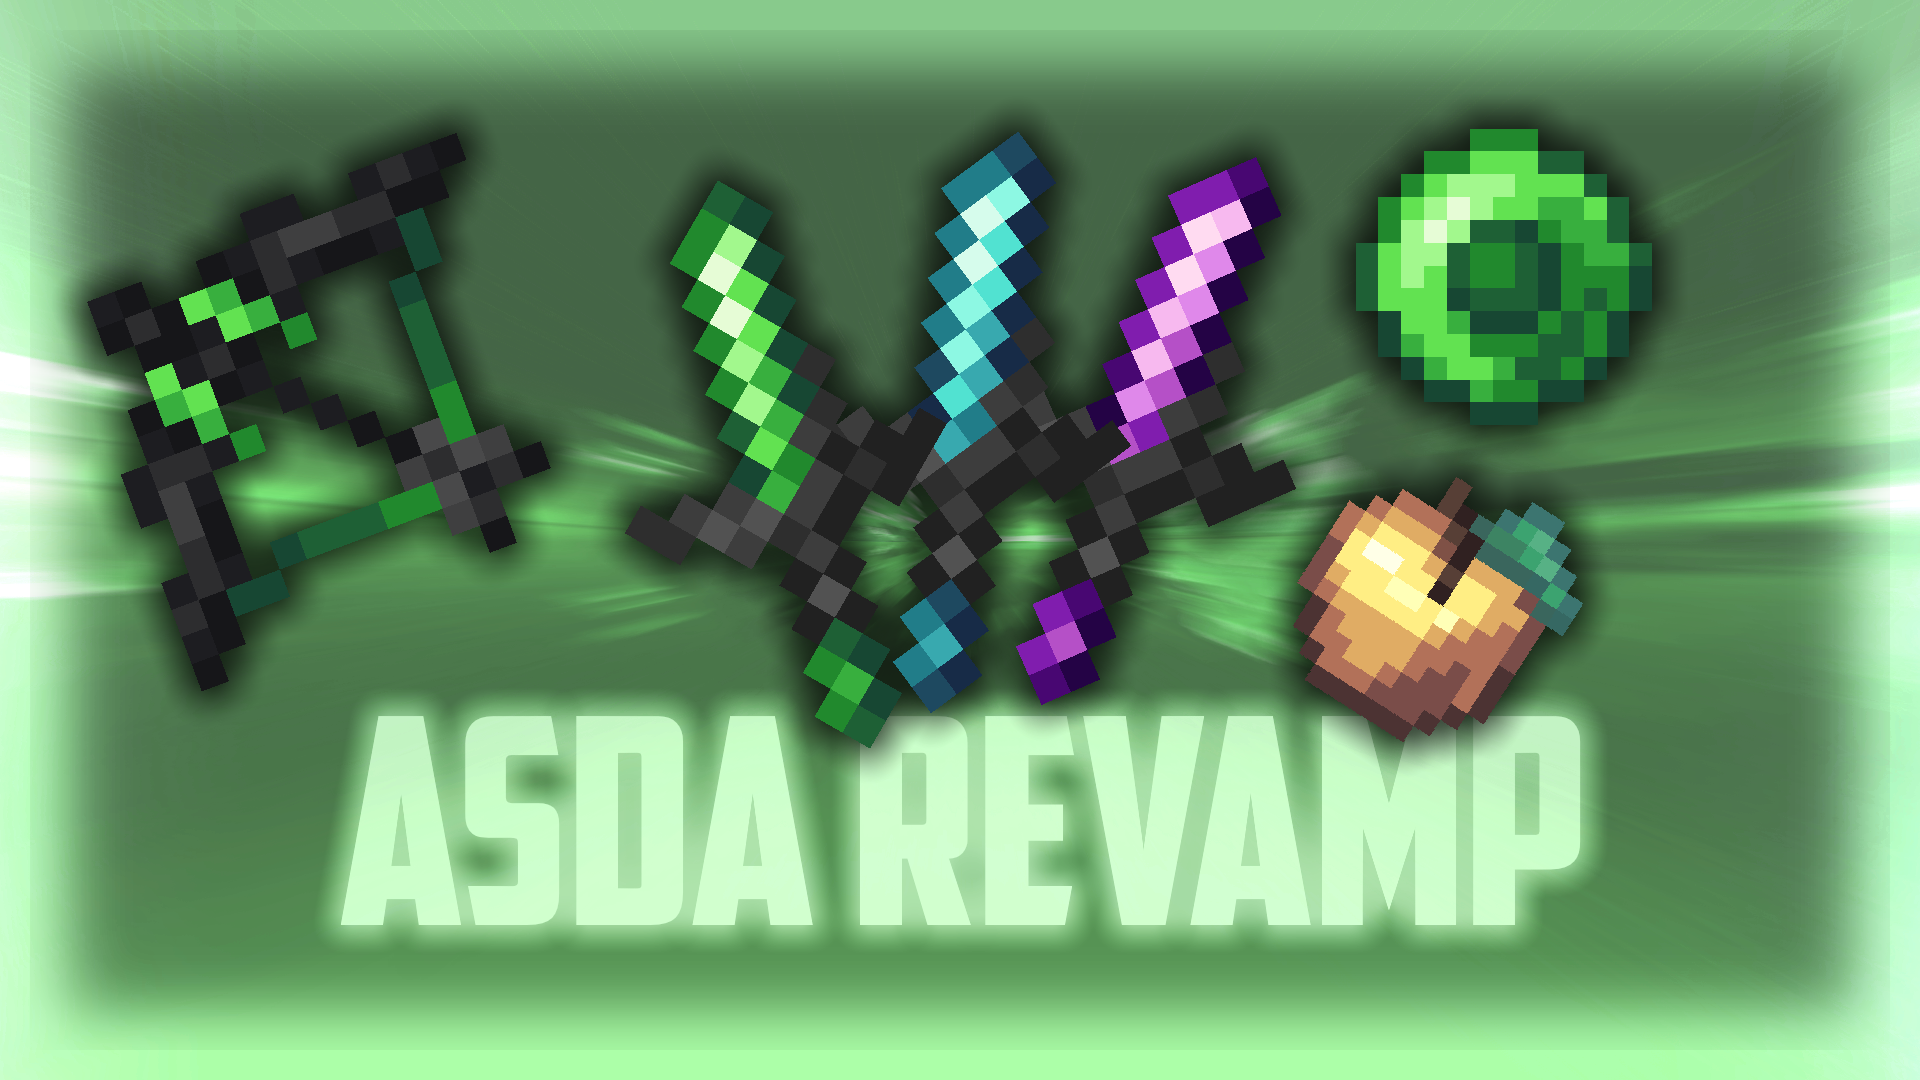 Asda Revamp - Blue recolor 16x by Zlax on PvPRP